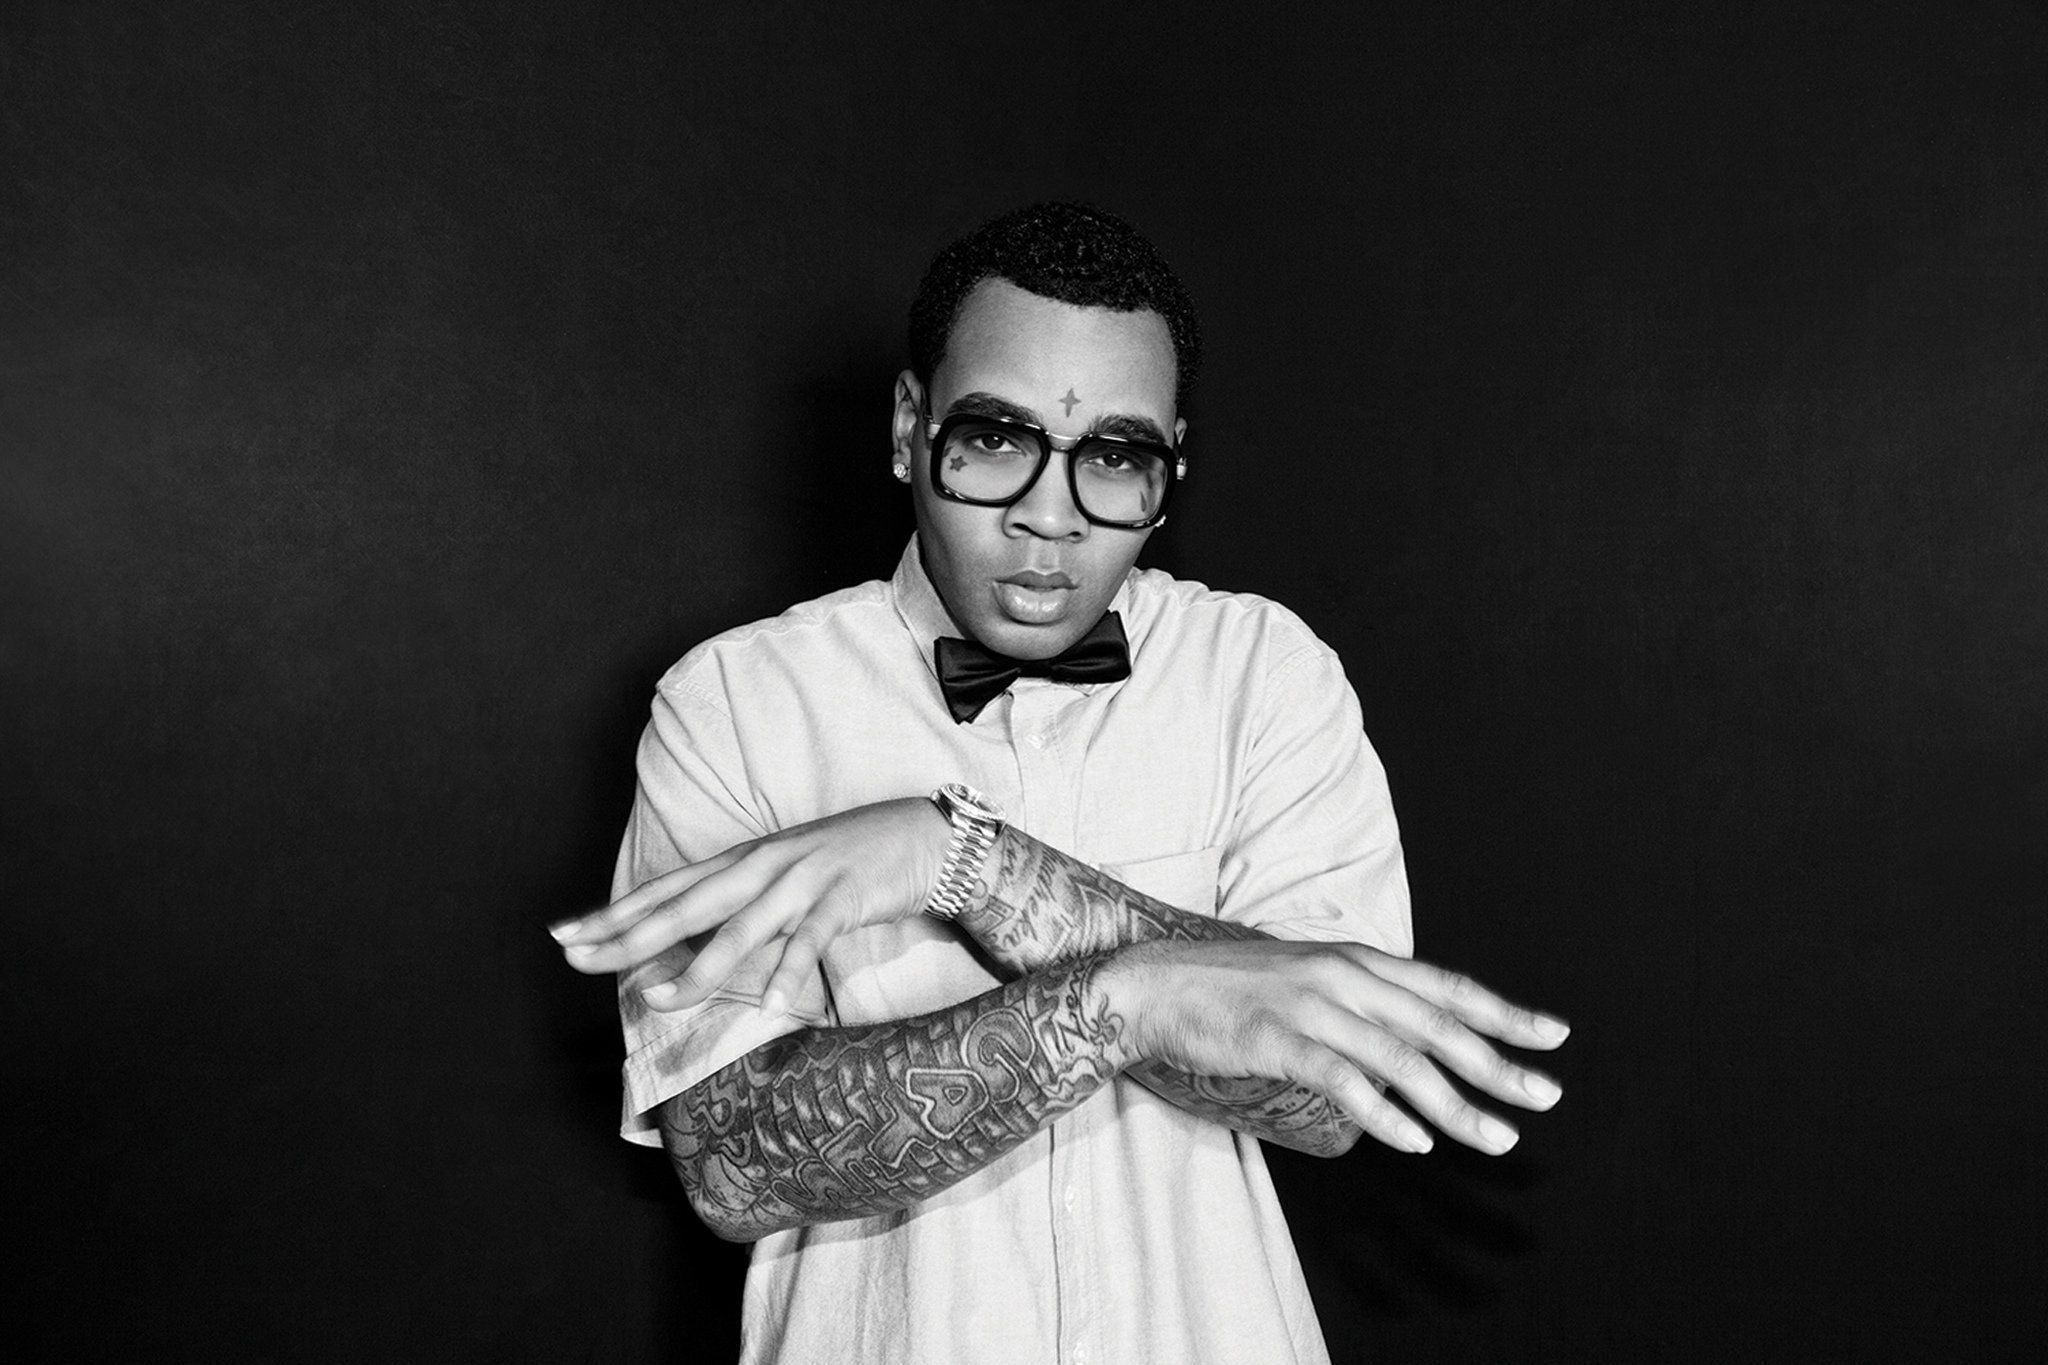 Kevin Gates Wallpapers Images Photos Pictures Backgrounds2048 x 1365